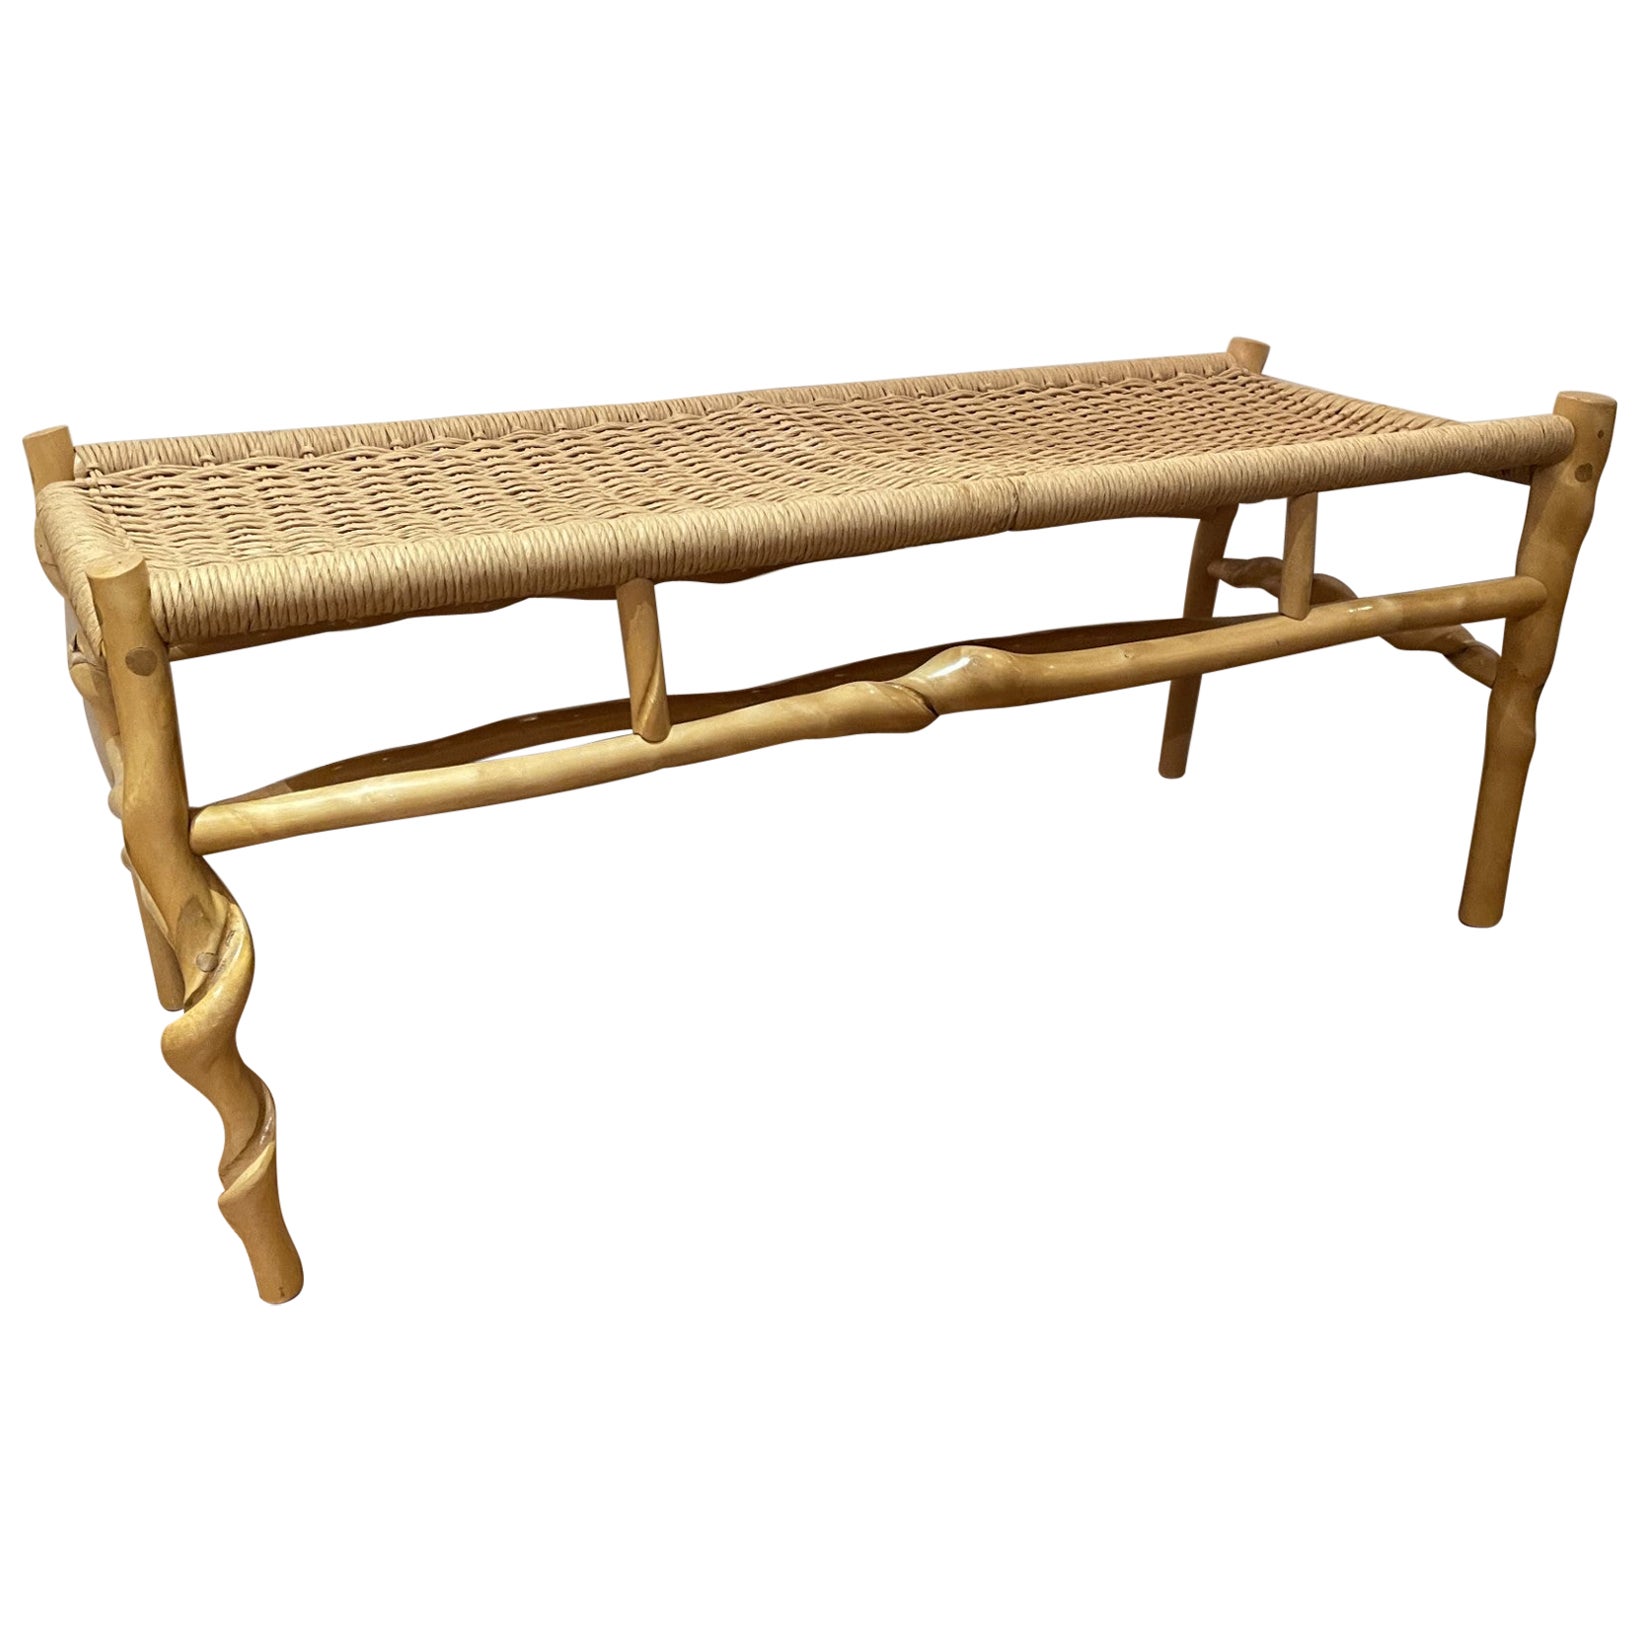  The Twisted Sassafras Wood & Rush Seat Bench, by Studio  Artist, David Ebner  For Sale